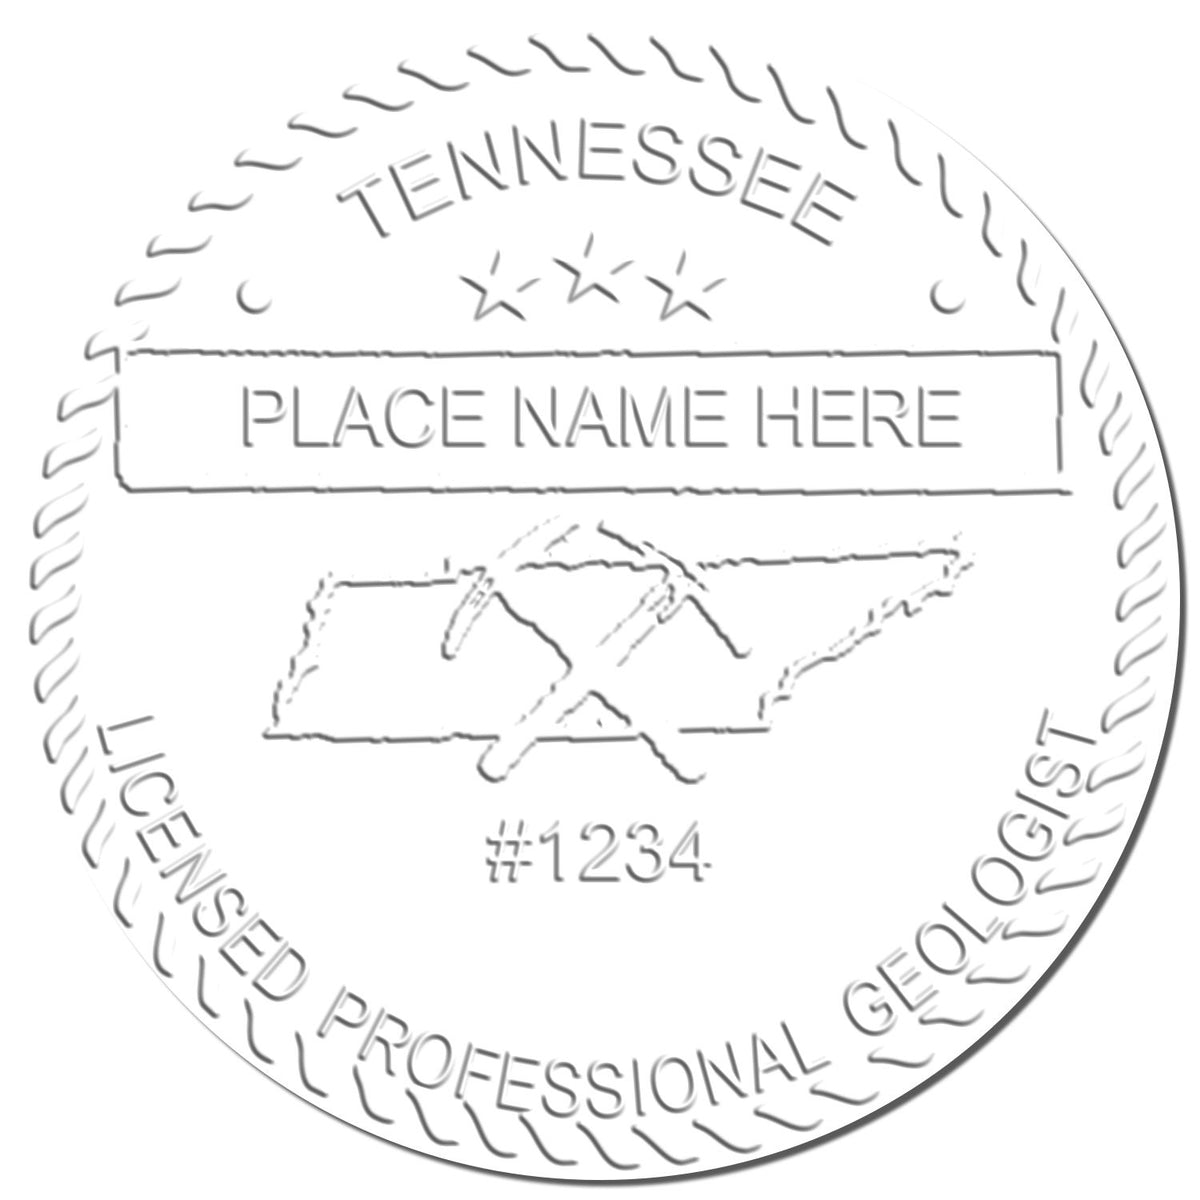 A stamped imprint of the Gift Tennessee Geologist Seal in this stylish lifestyle photo, setting the tone for a unique and personalized product.